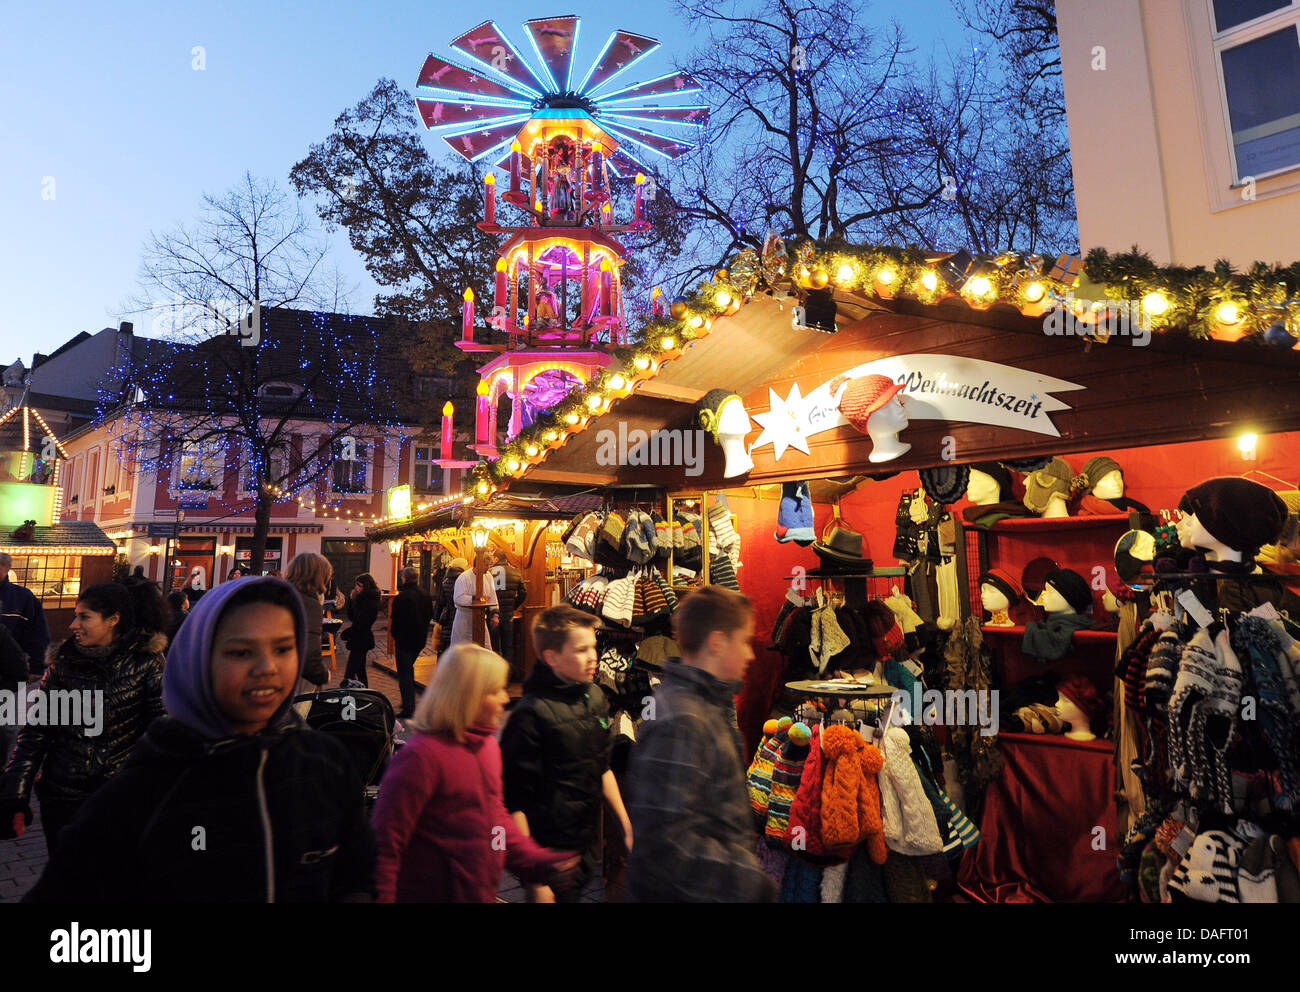 People walk by the Christmas market during its opening in Potsdam, Germany, 21 November 2011. Until 27 December 2011, around 800,000 people are expected to visit the market.Photo: Bernd Settnik Stock Photo